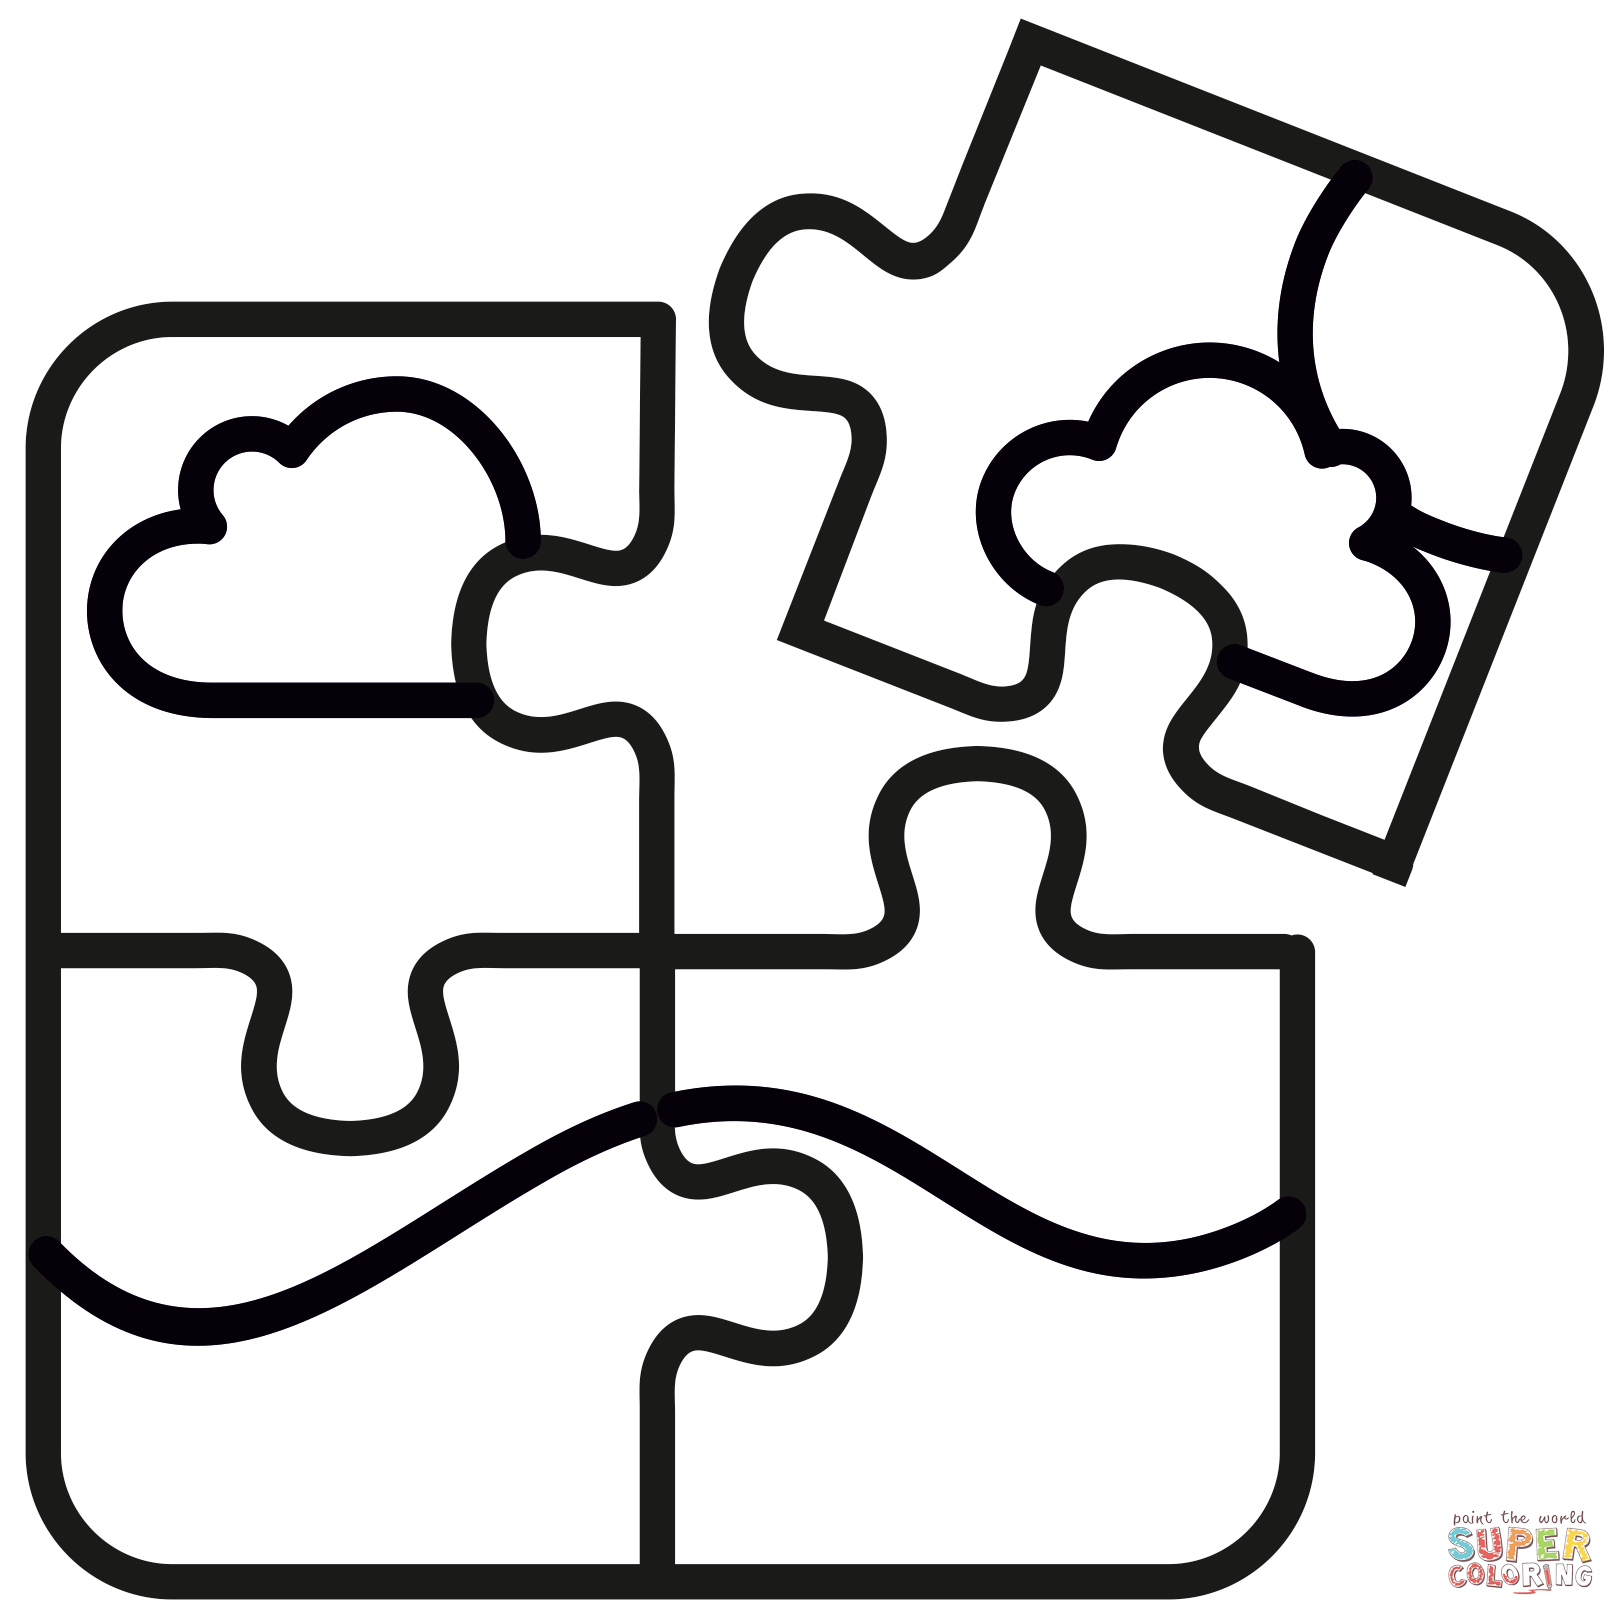 Puzzle Pieces coloring page | Free Printable Coloring Pages